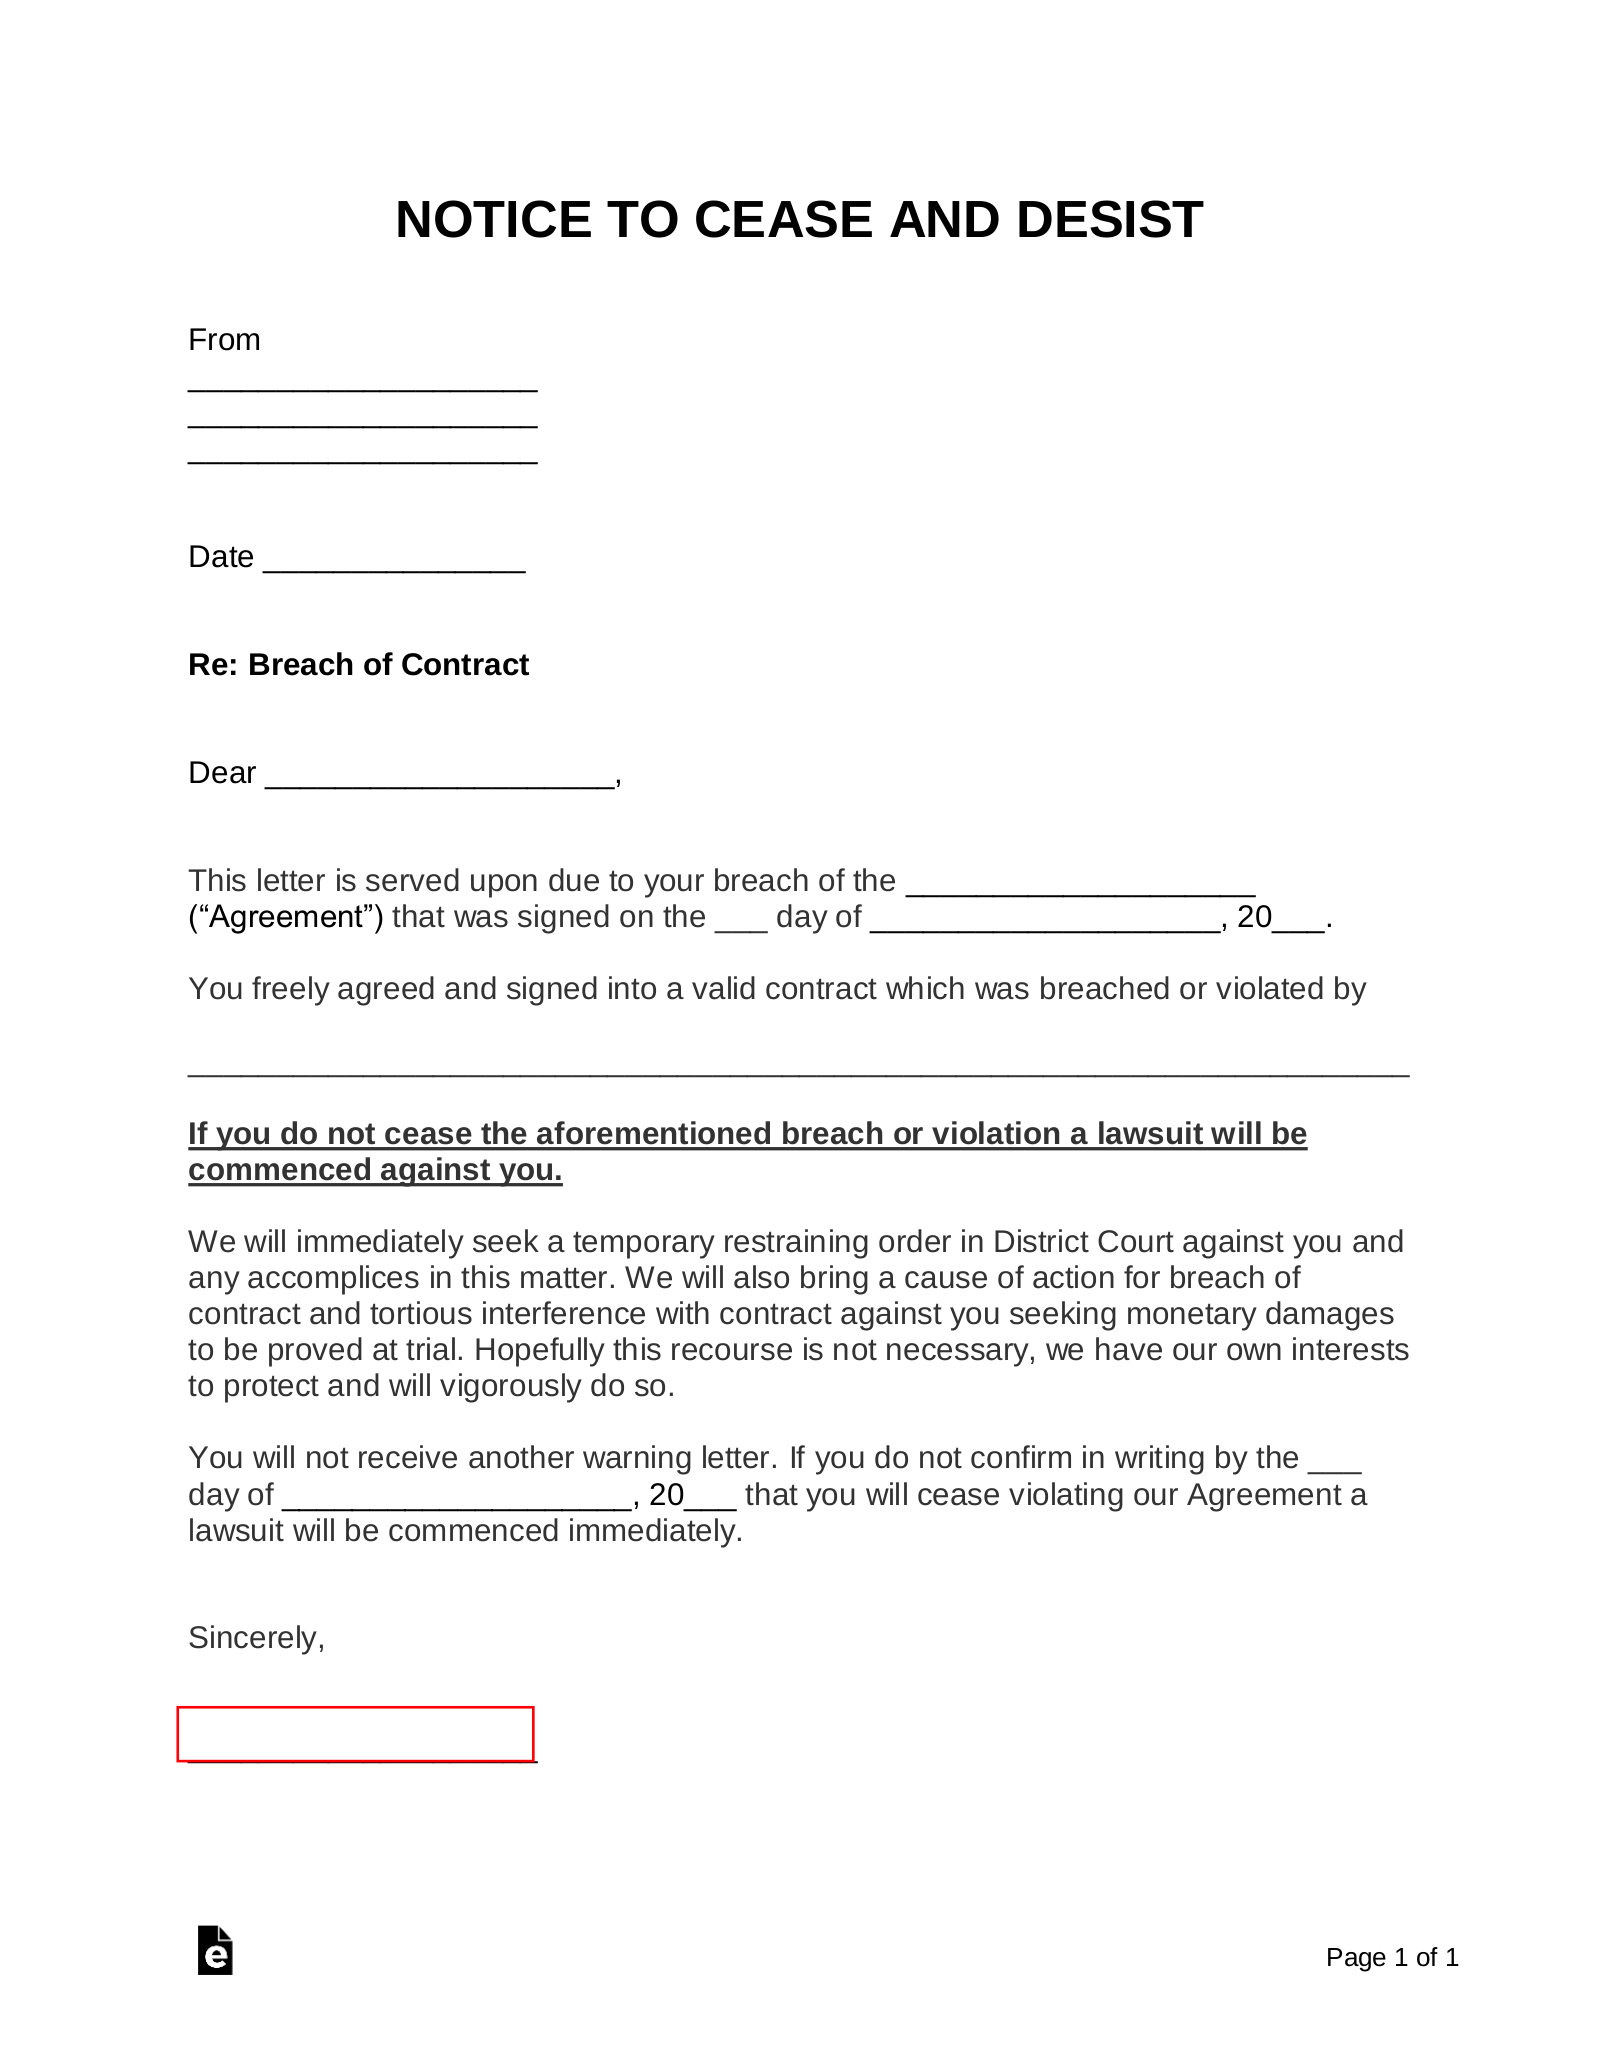 Breach of Contract Cease and Desist Letter Template